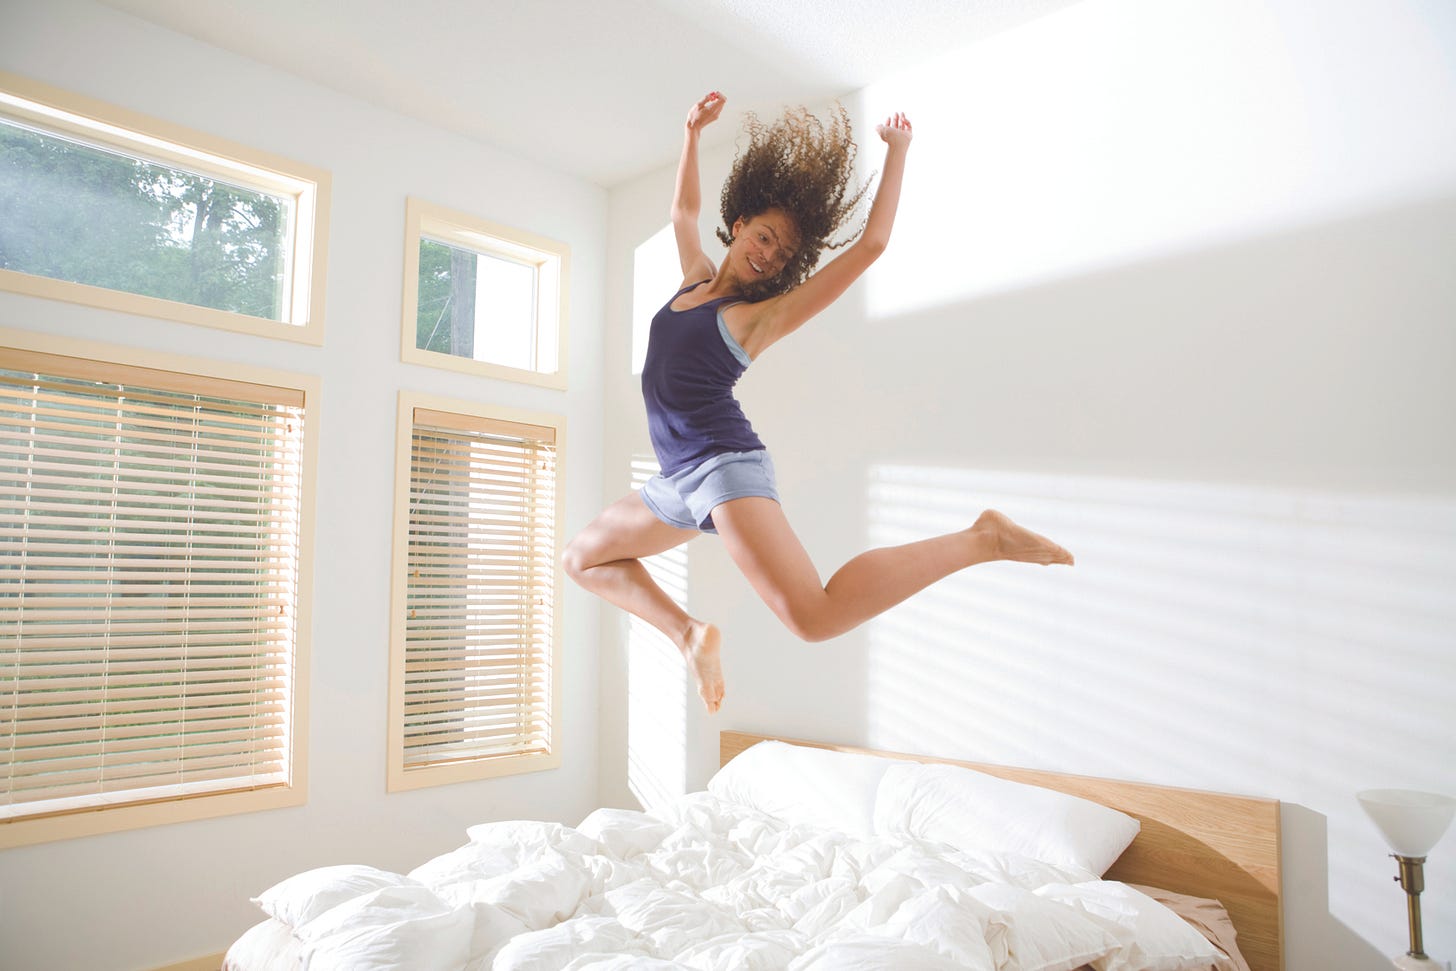 22 Ways To Wake Up And Have a Positive Day